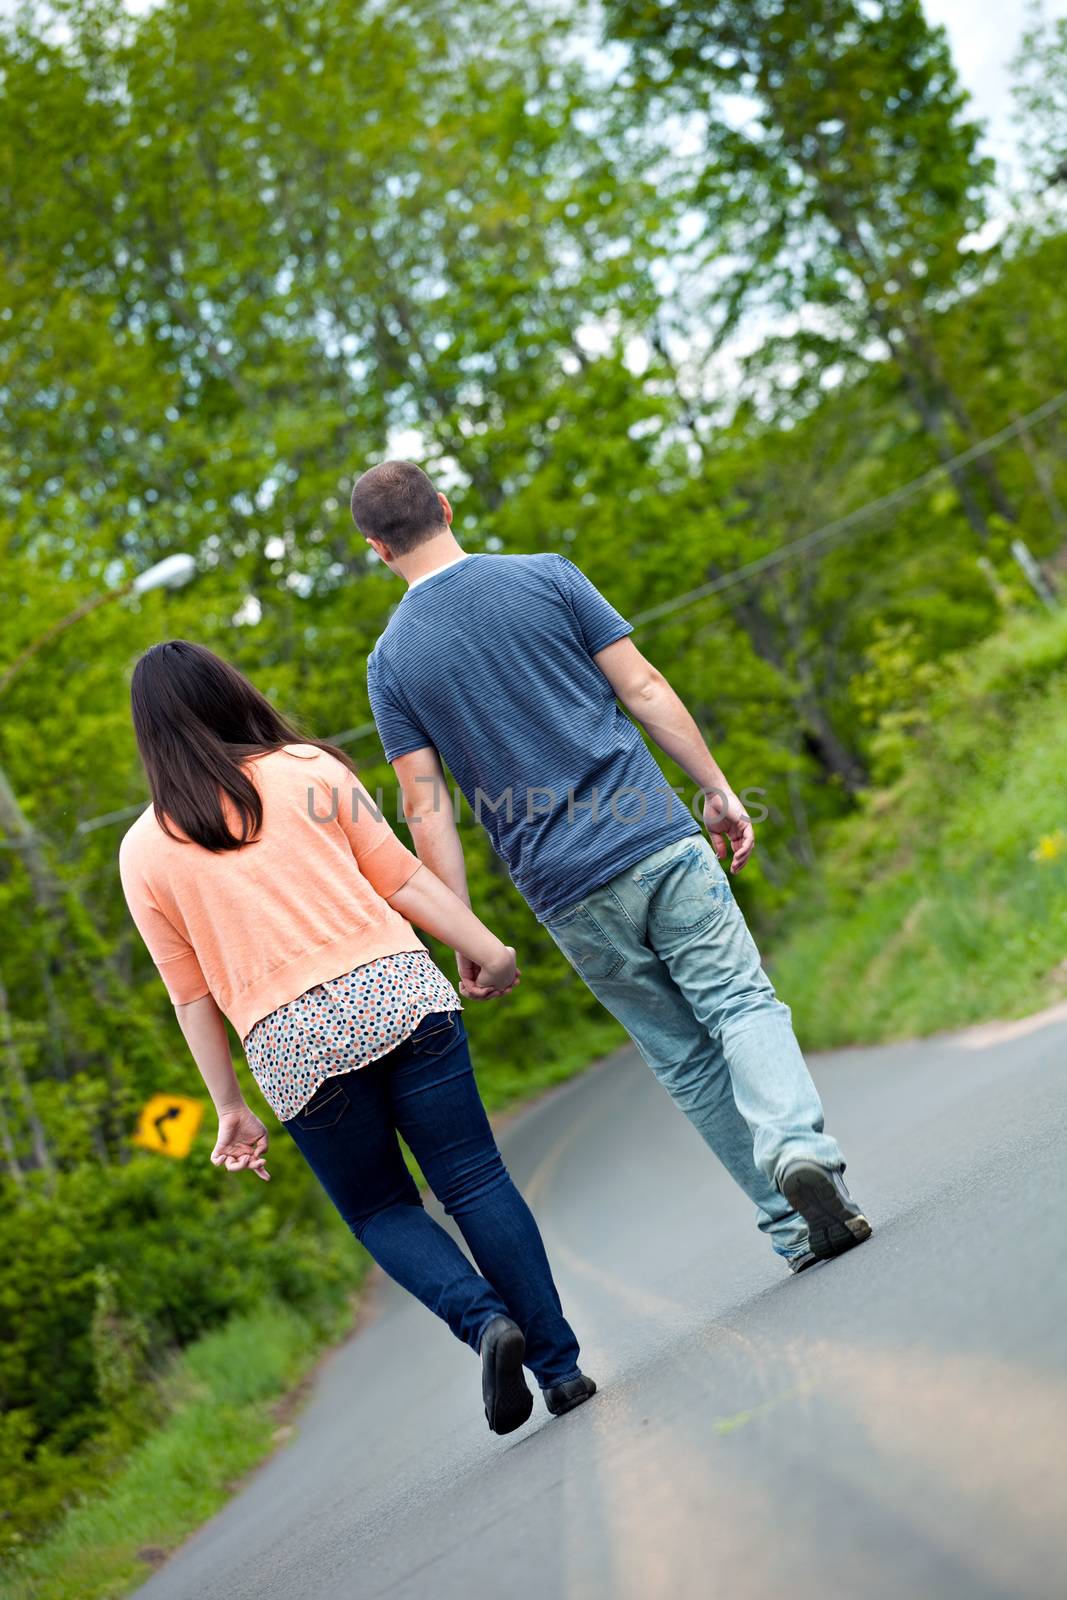 Young happy couple enjoying each others company outdoors walking down an empty road. A very fitting theme for the start of marriage or any romantic relationship.